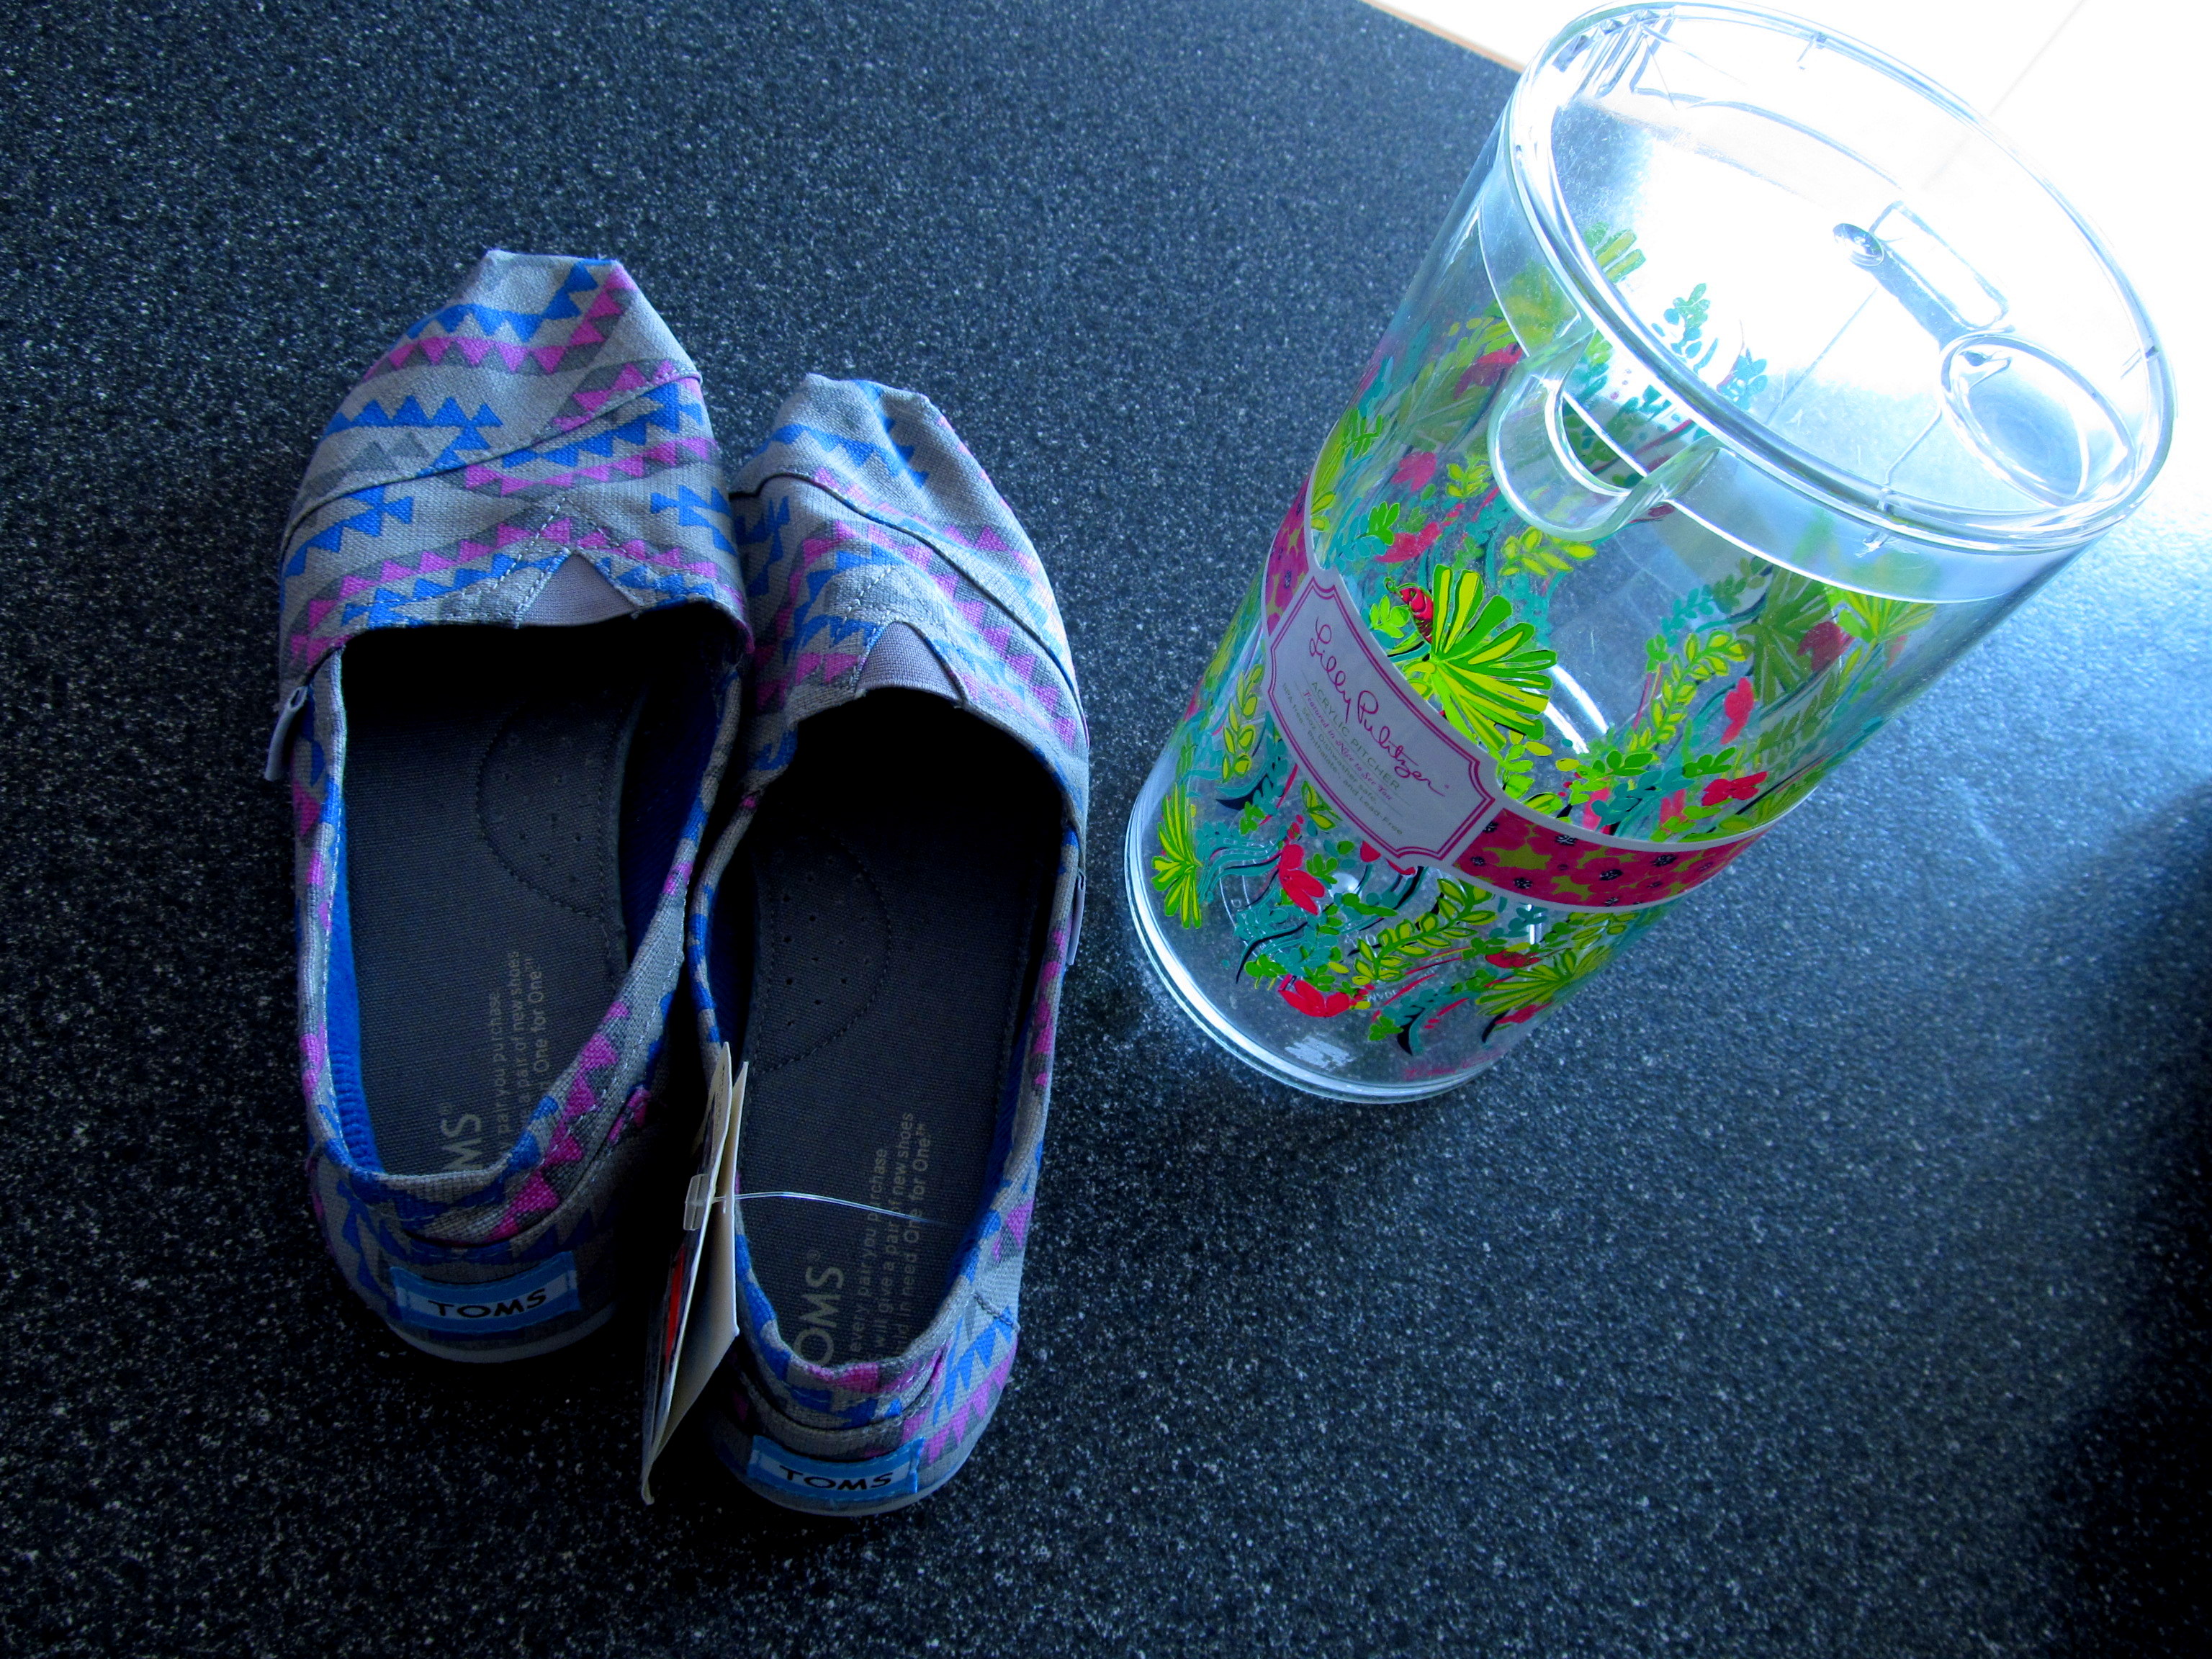 Toms (on SALE) from Urban Outfitters, and an on-sale Lilly Pulitzer pitcher for my sis!